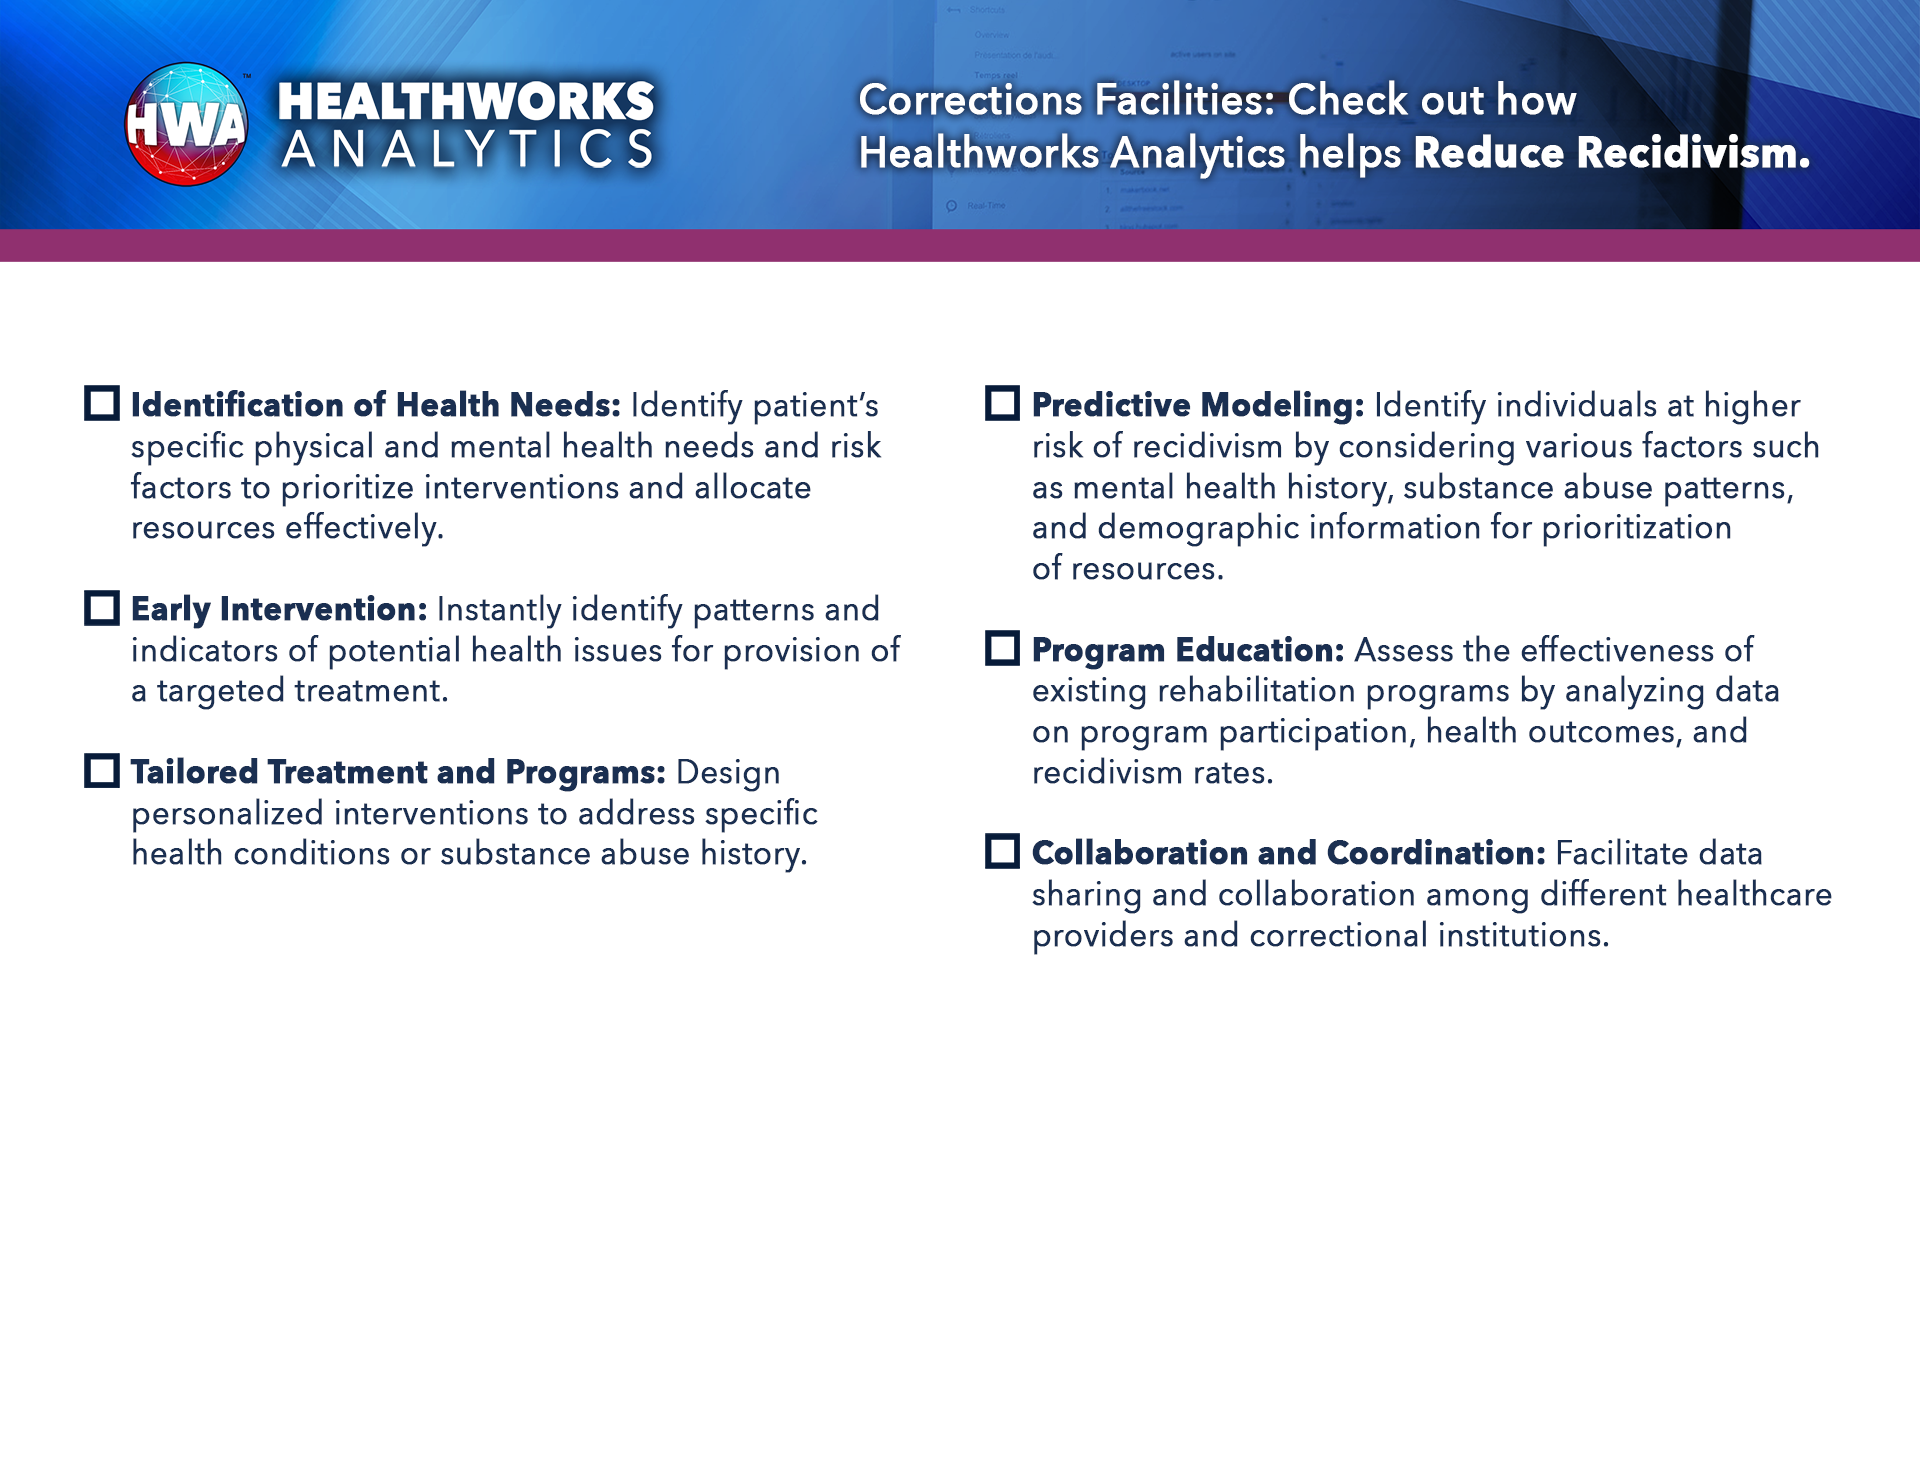 Corrections-Facilities---Check-out-how-Healthworks-Analytics-helps-Reduce-Recidivism-back